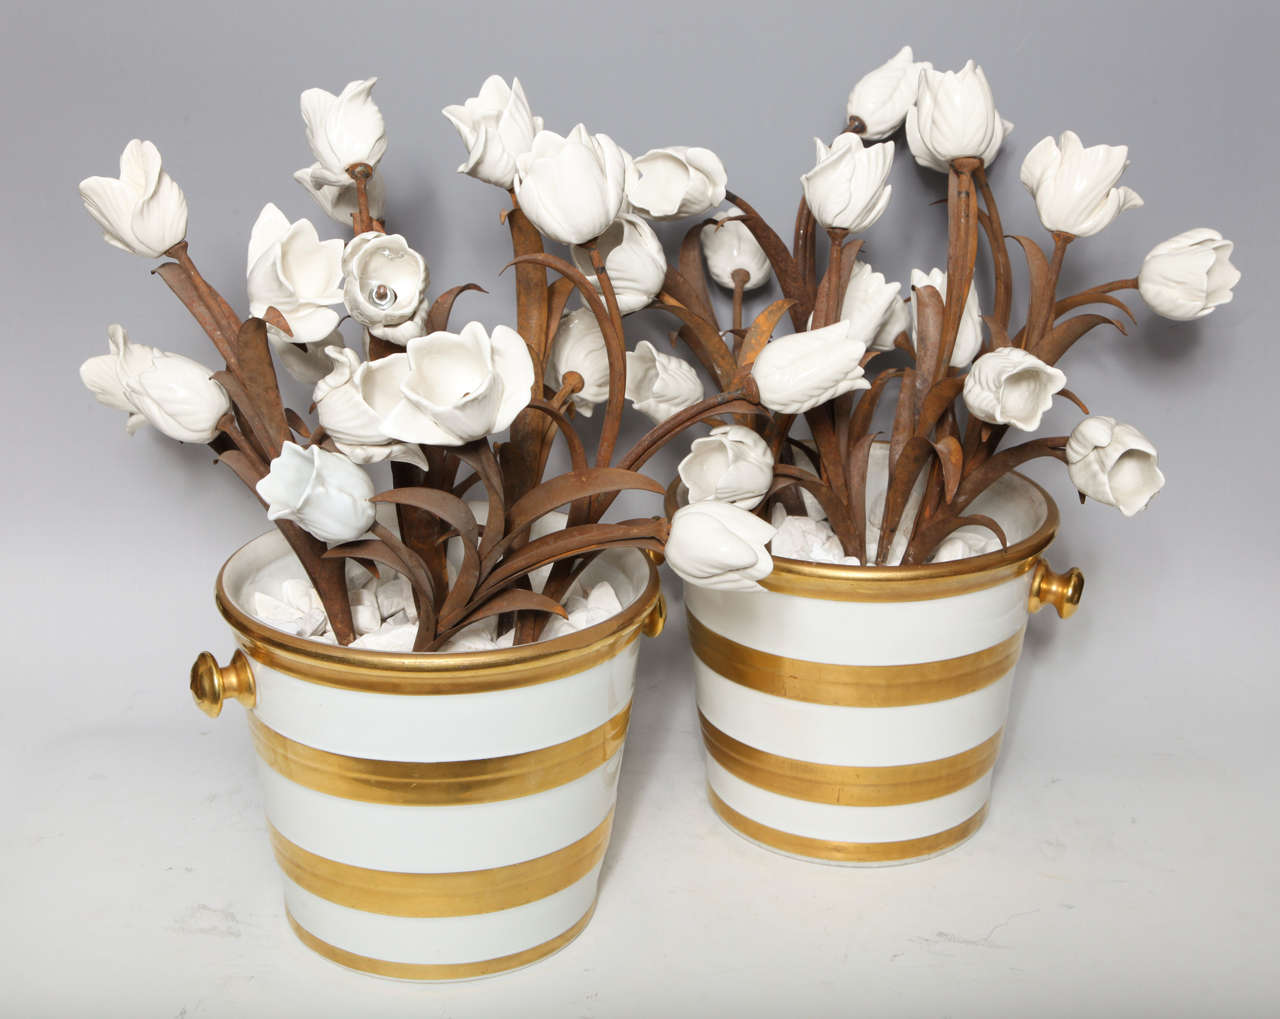 A large and quite unusual pair of antique French Louis XVI style white and gold two handled porcelain buckets filled with white tulips mounted on handmade metal stems, attributed to Jansen Paris, circa 1910.
 